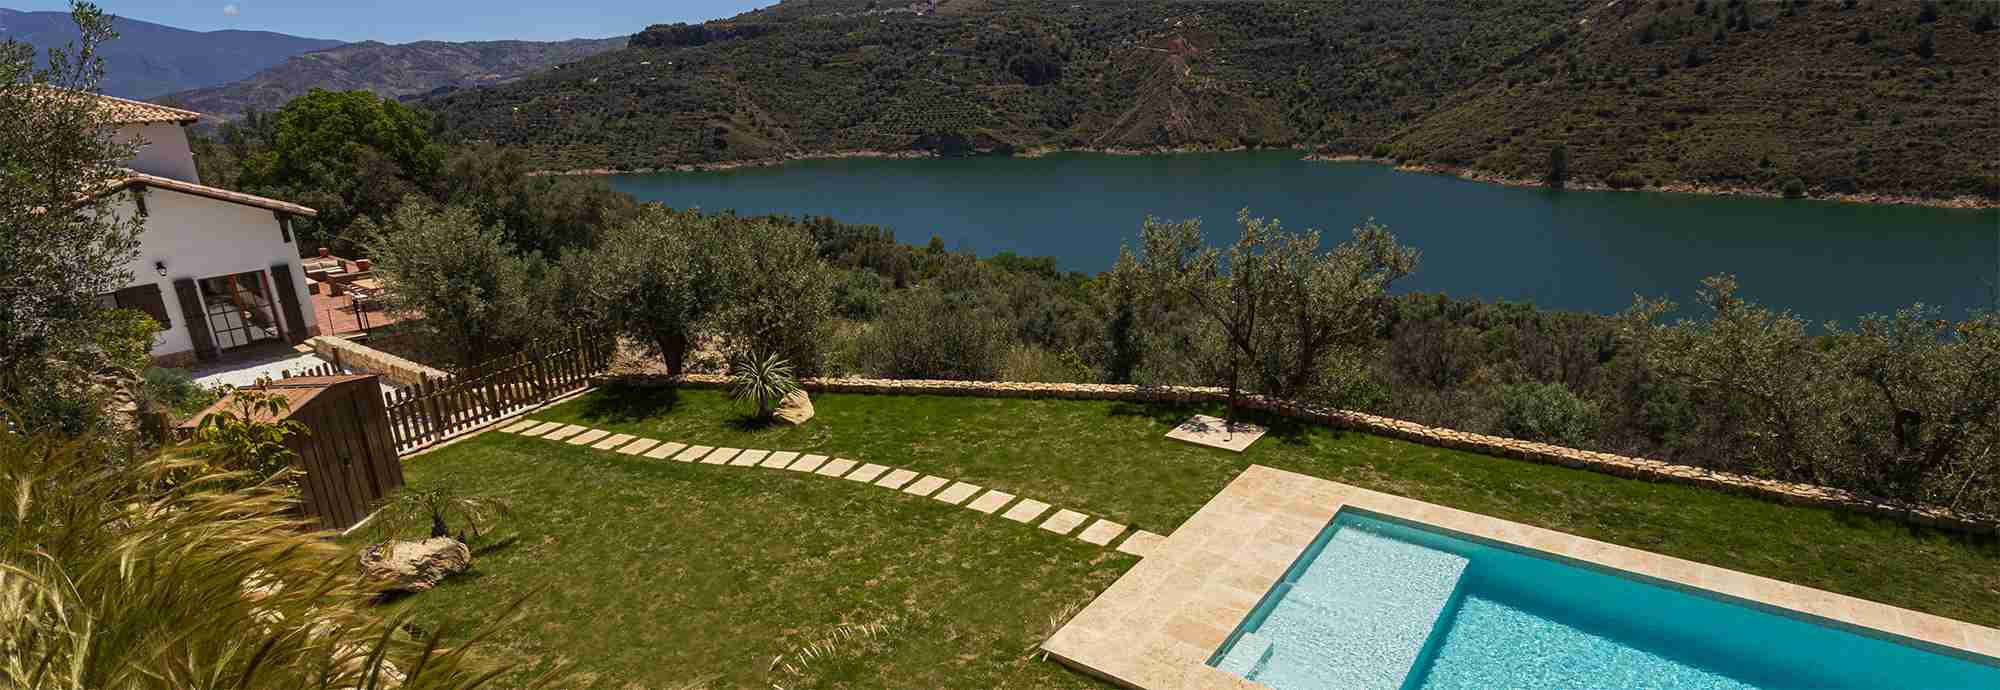 Villa in priviledge location by lake with exceptional pool area